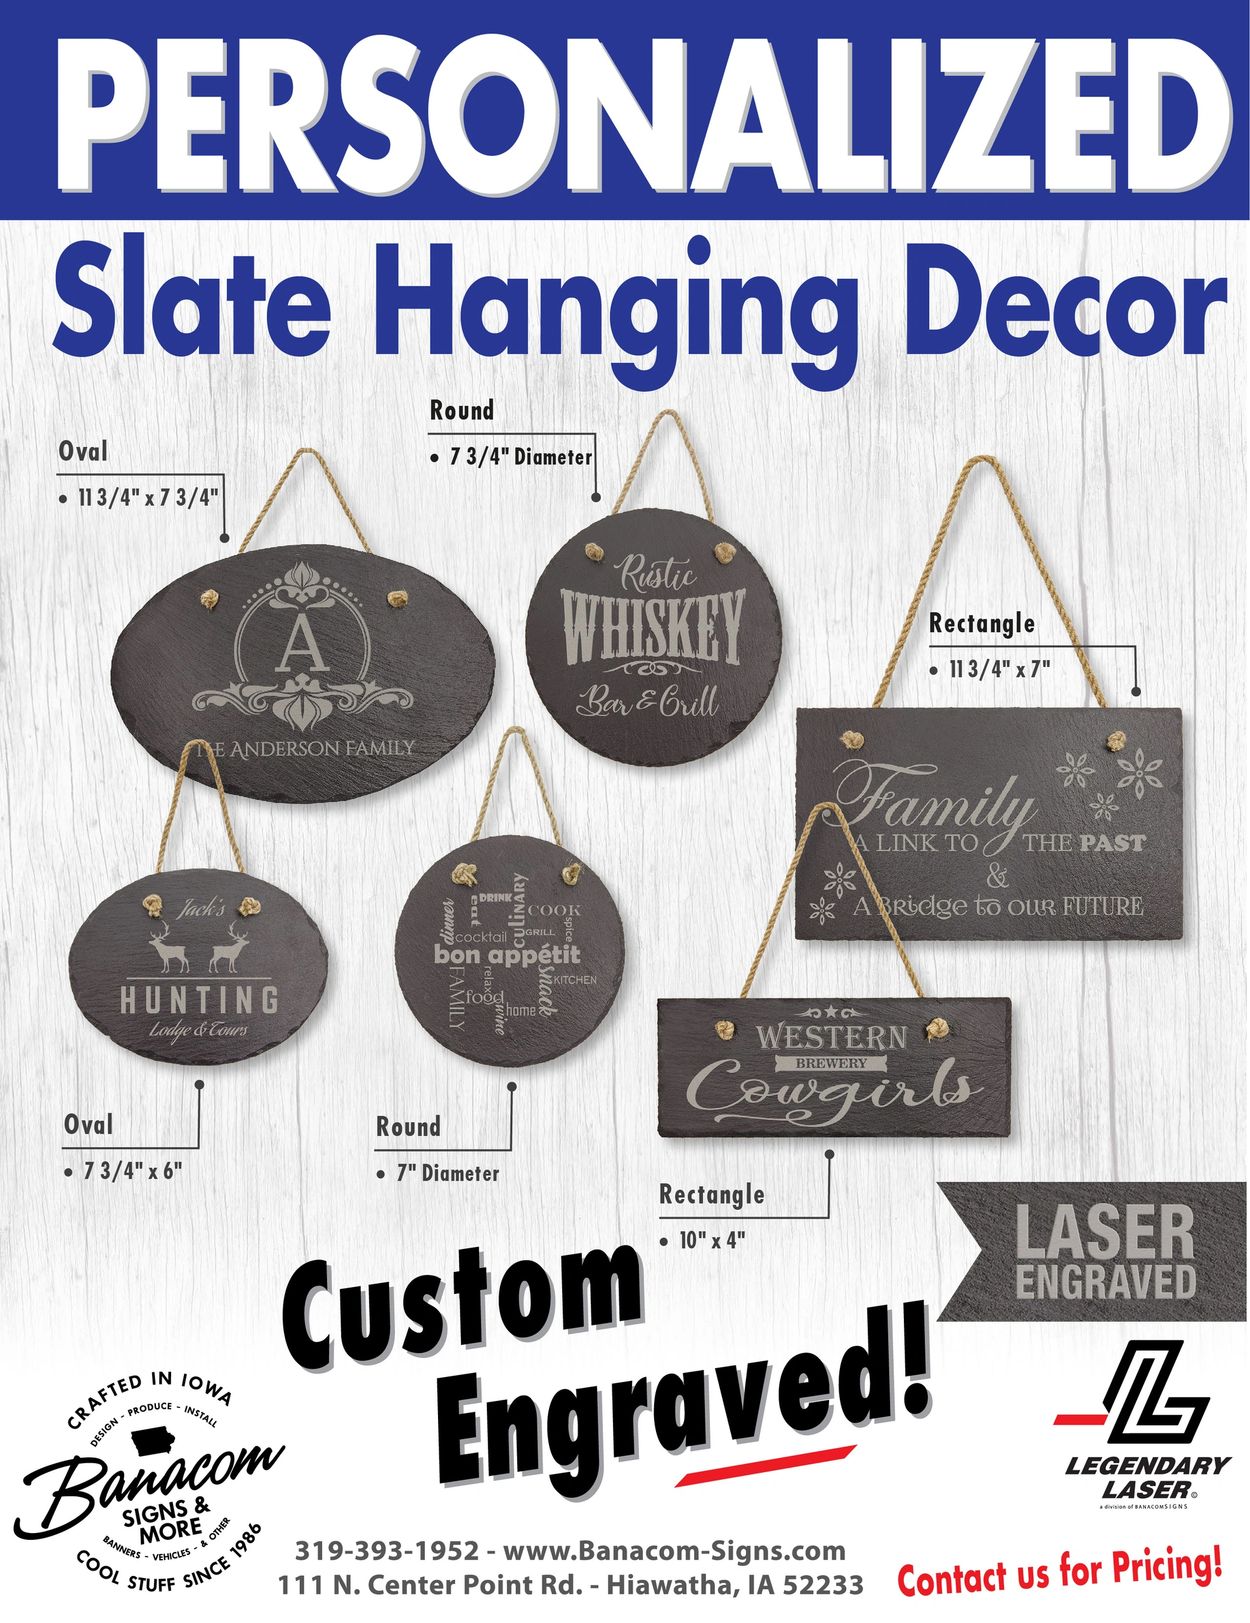 Slate Wall hanging decor branded and customized for you!